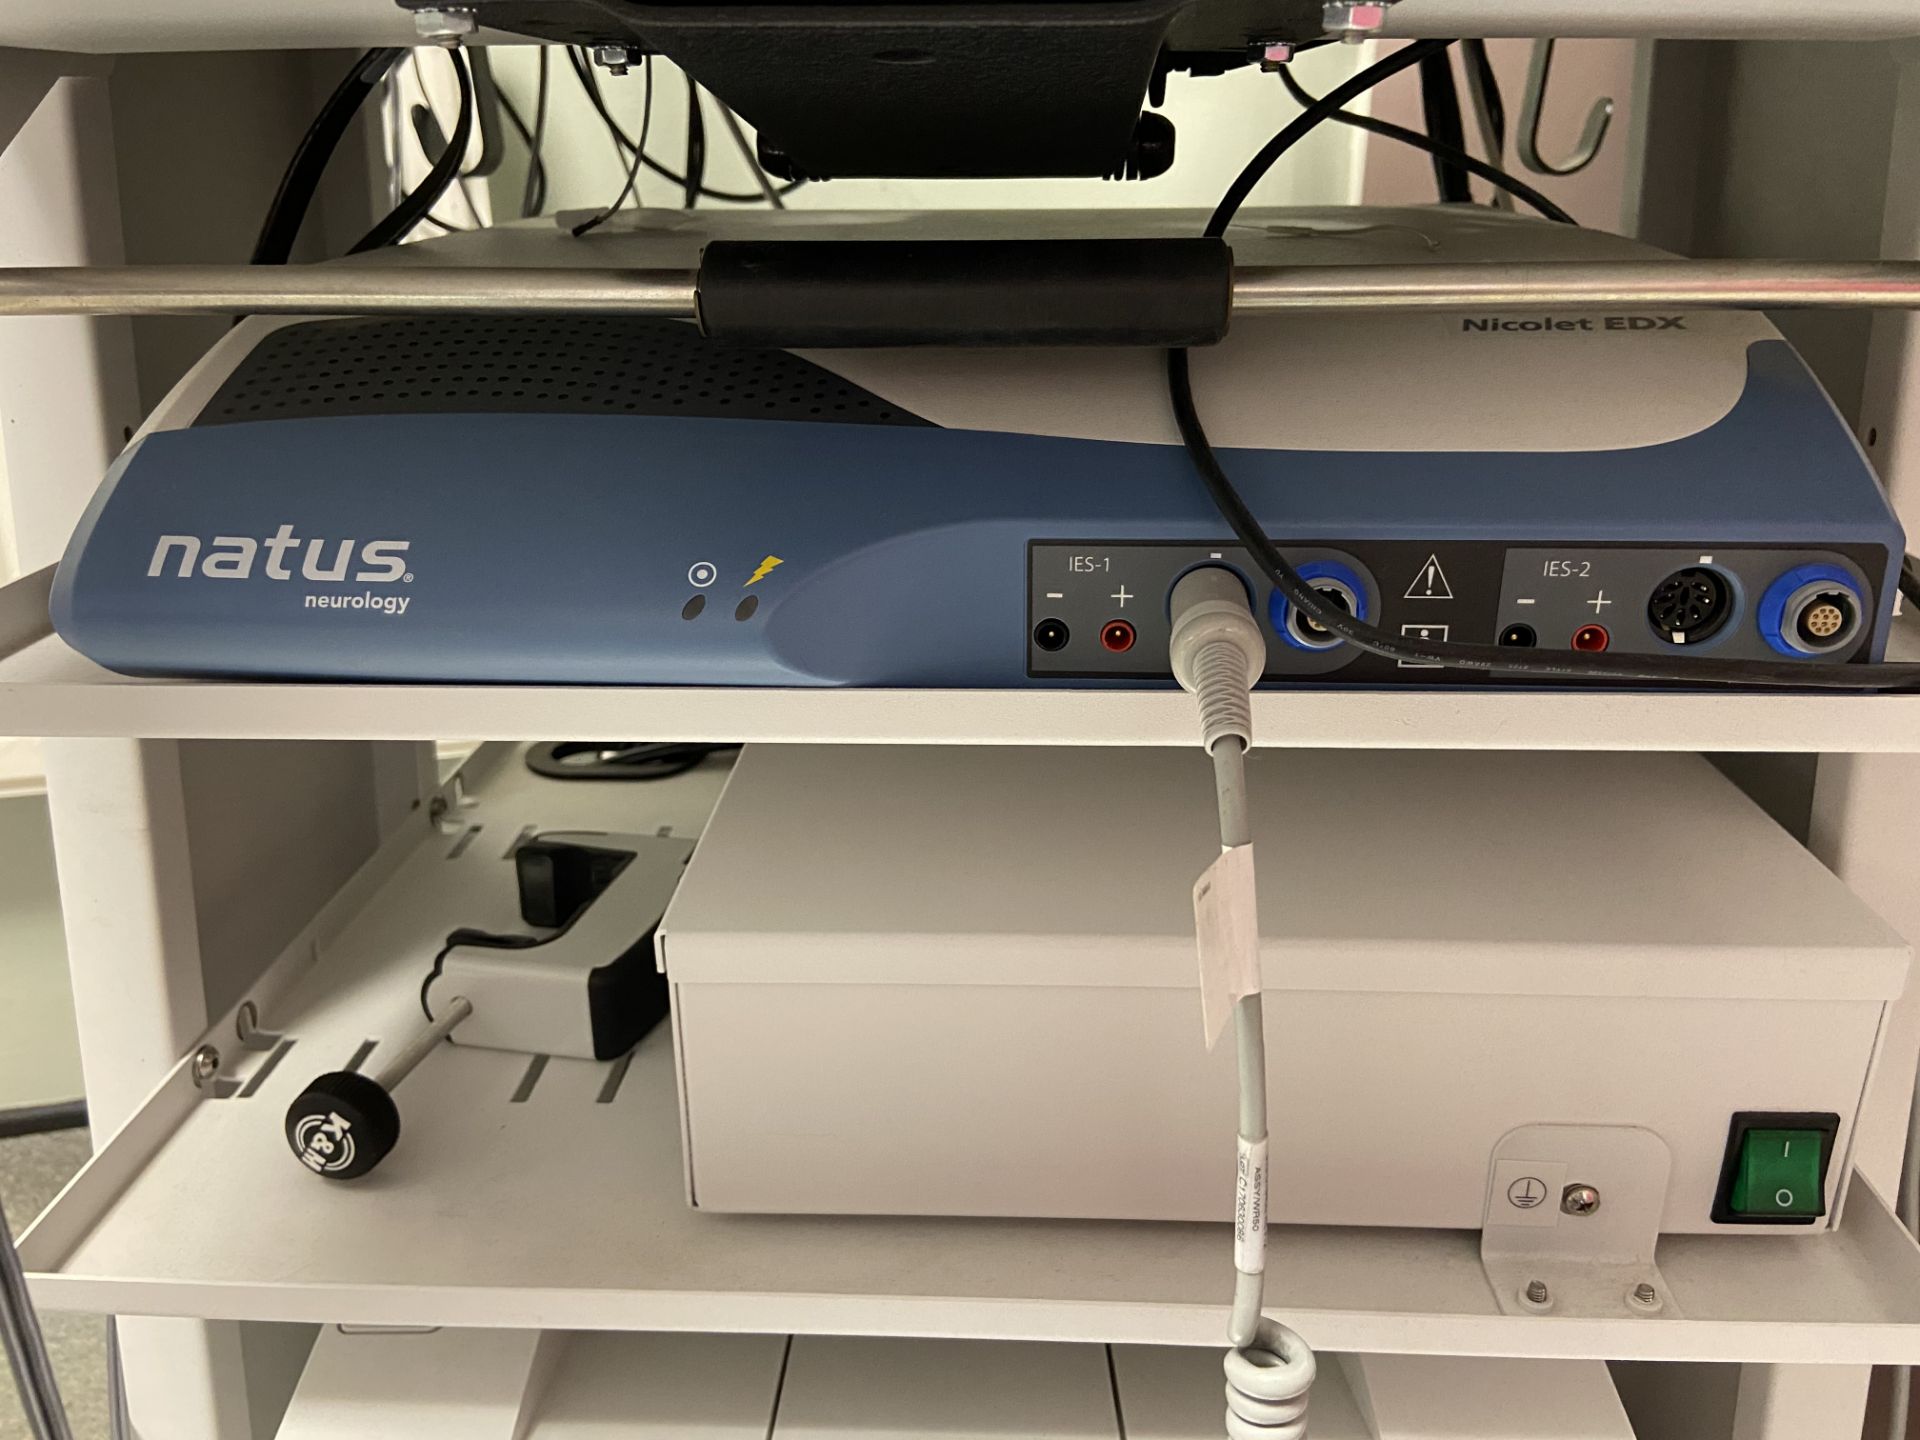 Natus neurology trolley mounted hearing test system with Nicolet AT2 amplifier and Telephonics TDH- - Image 4 of 4